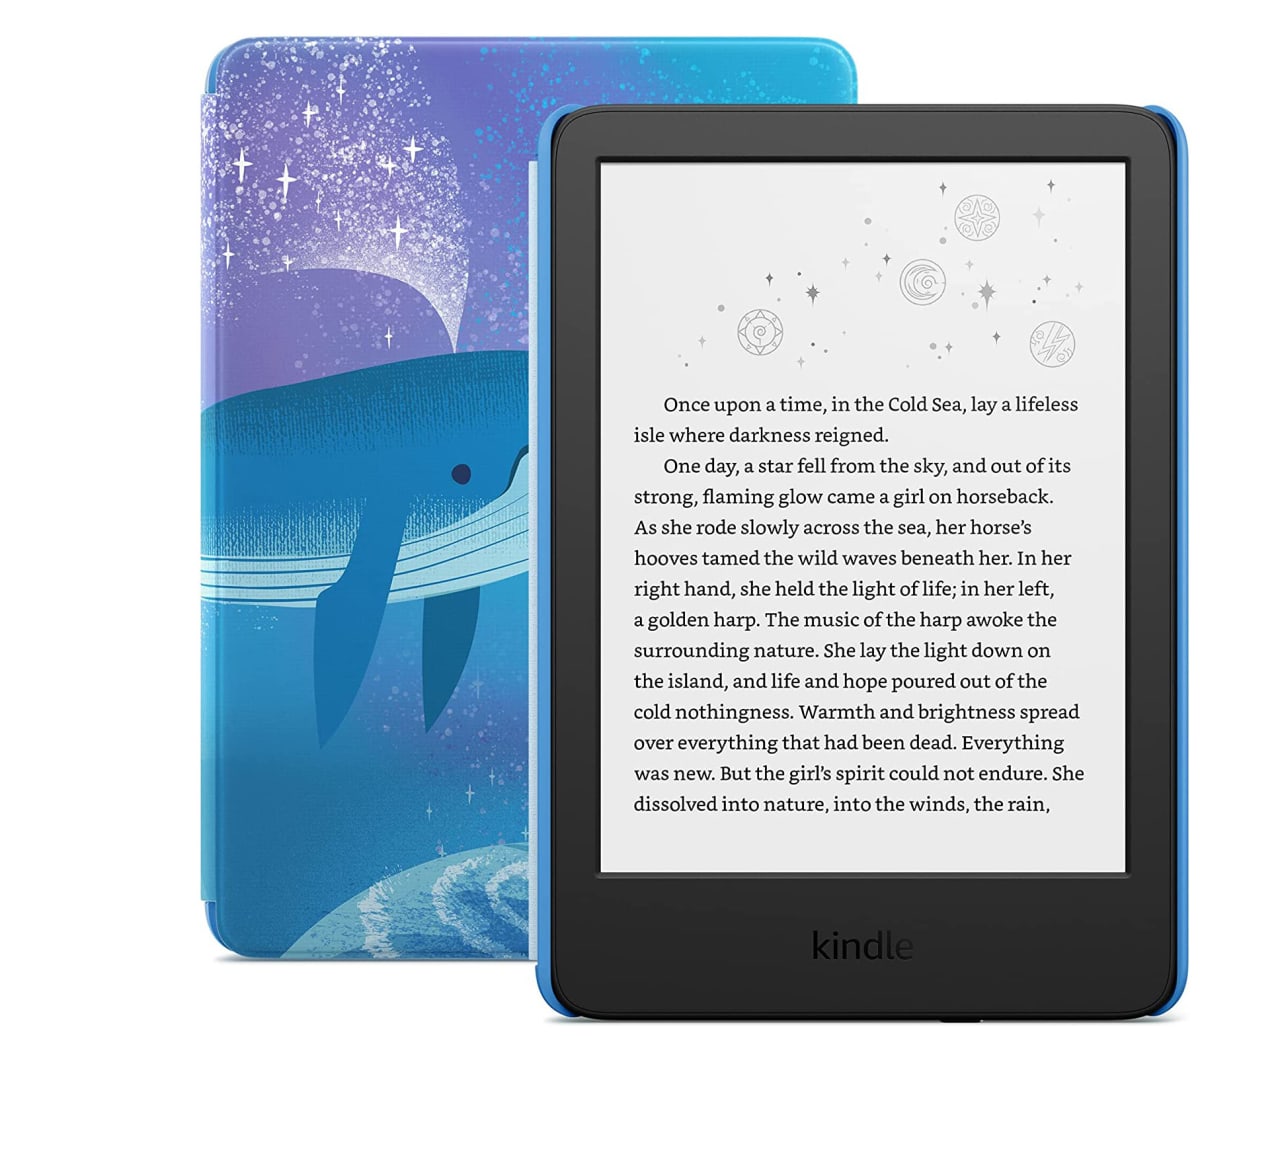 How to load ebooks on the Kindle e-reader 2022